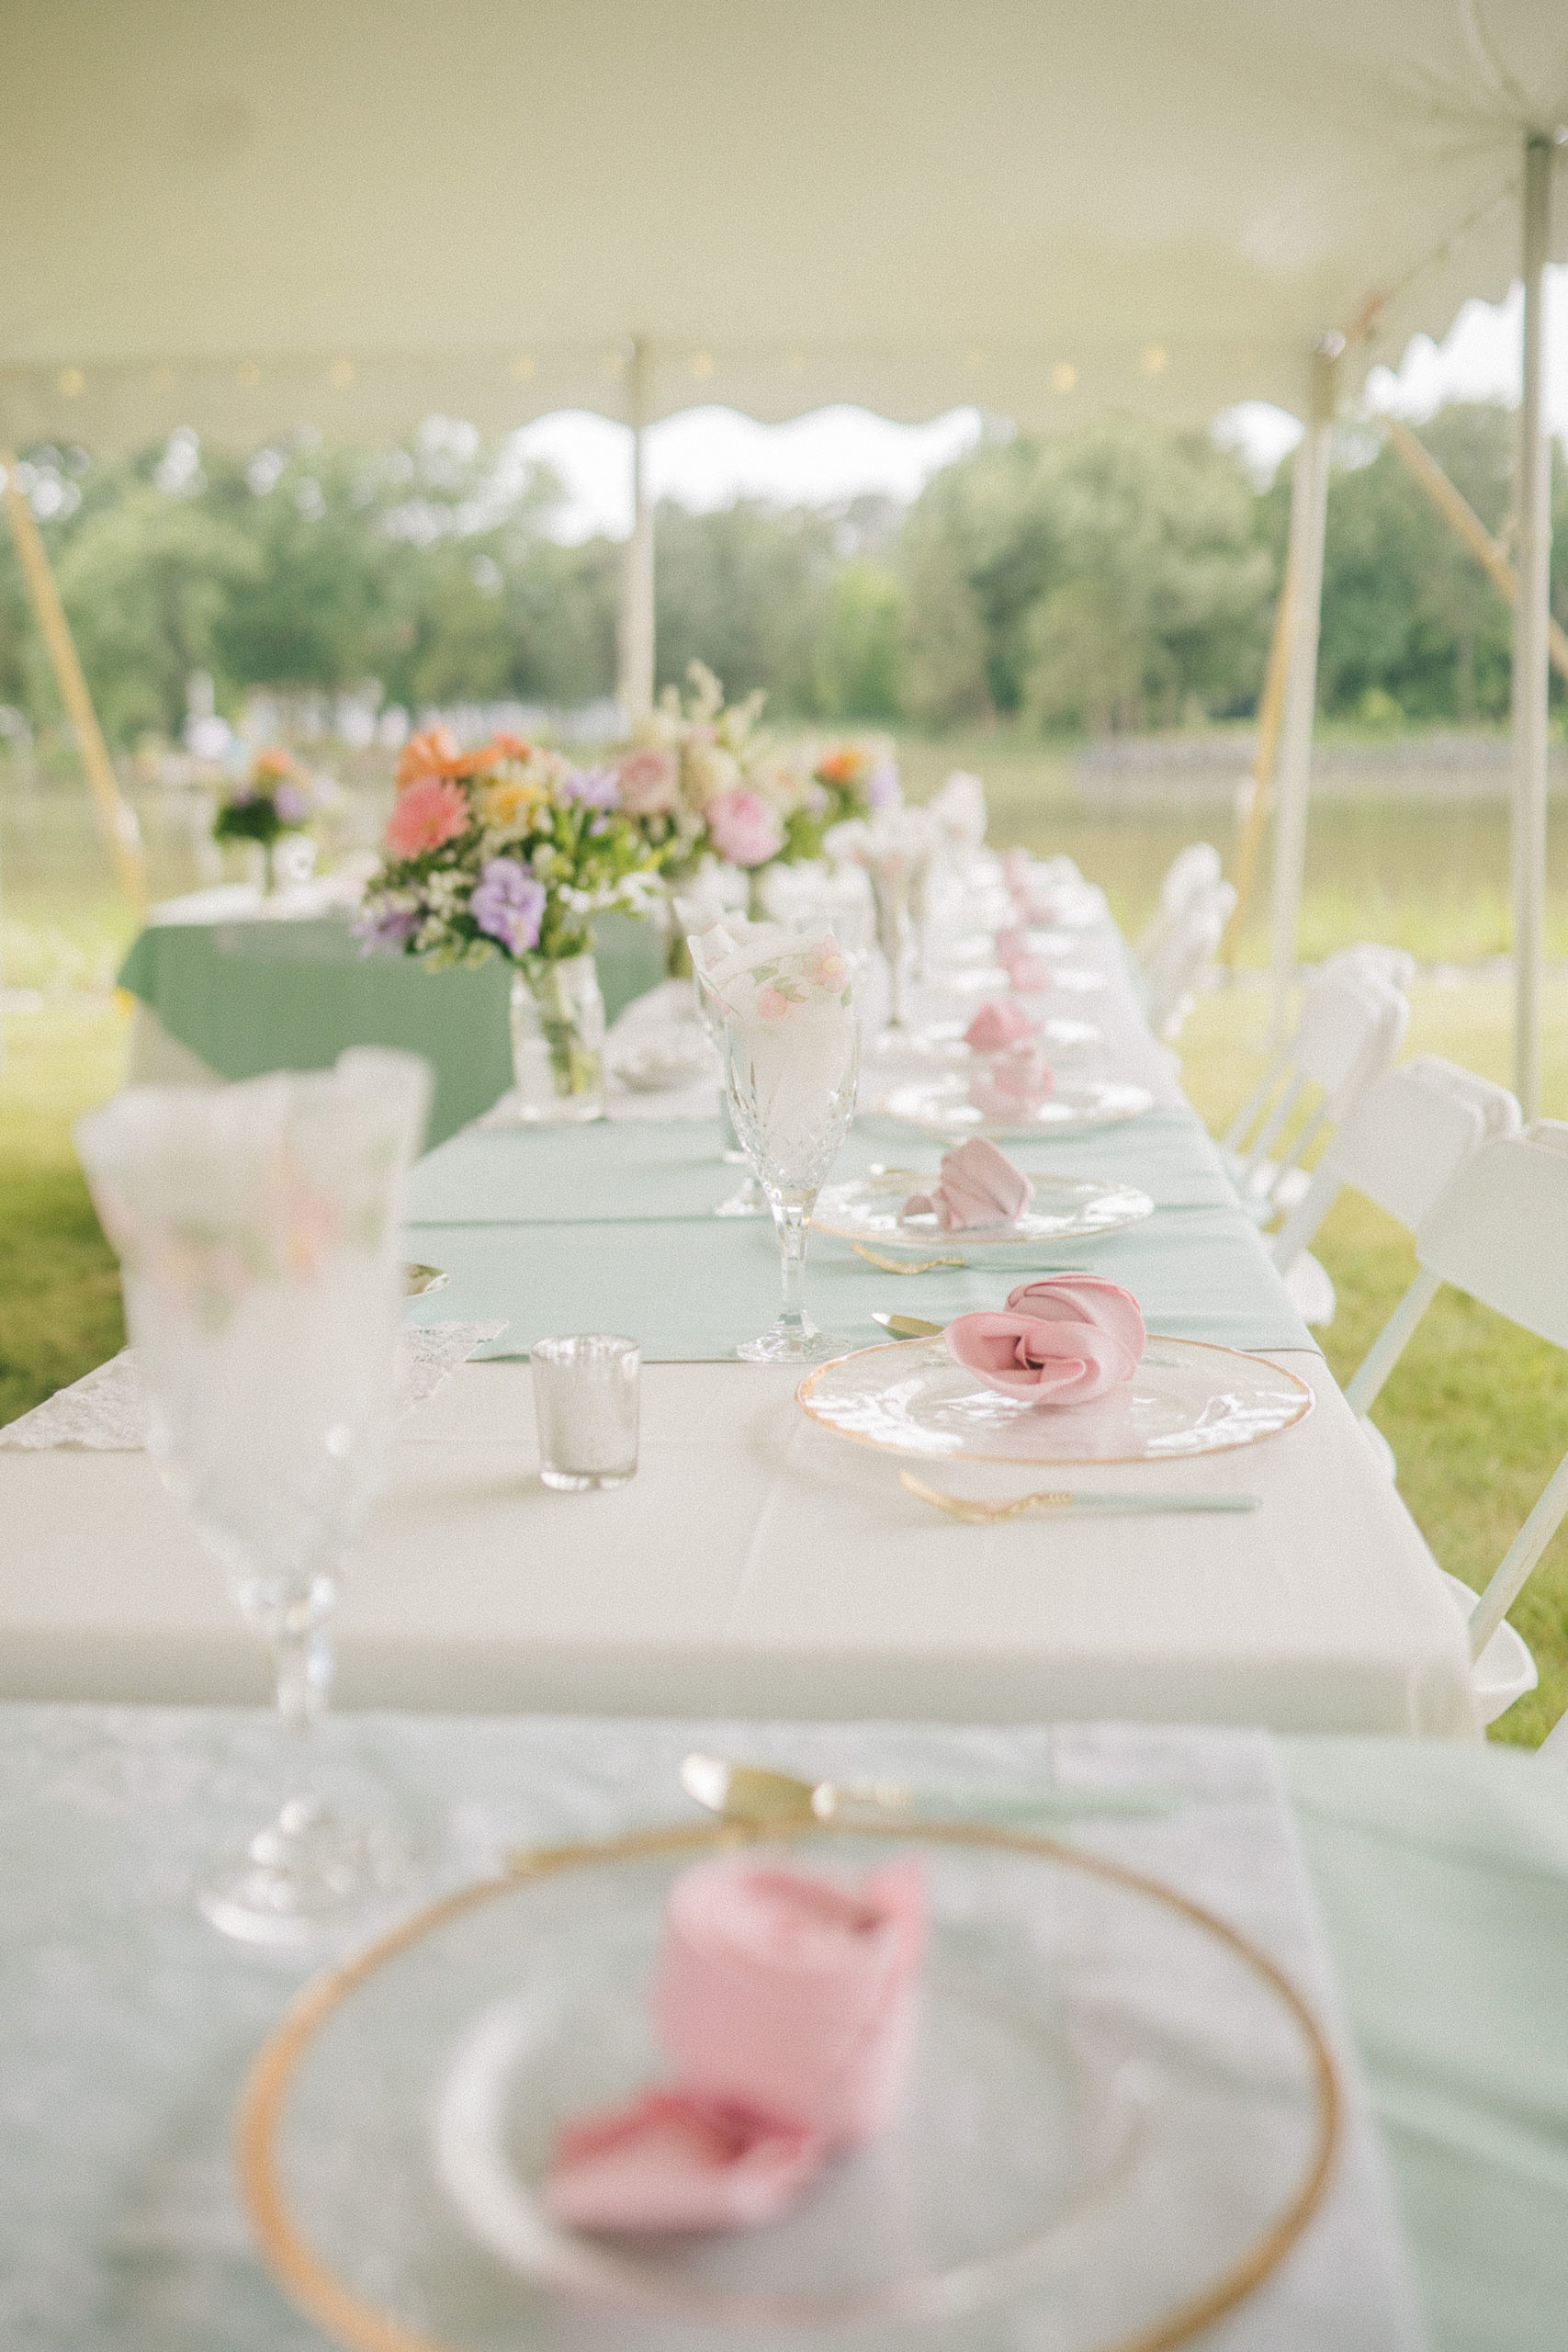 elegant table setting for wedding day in Maryland destiantion wedding with pink, mint green and florals details